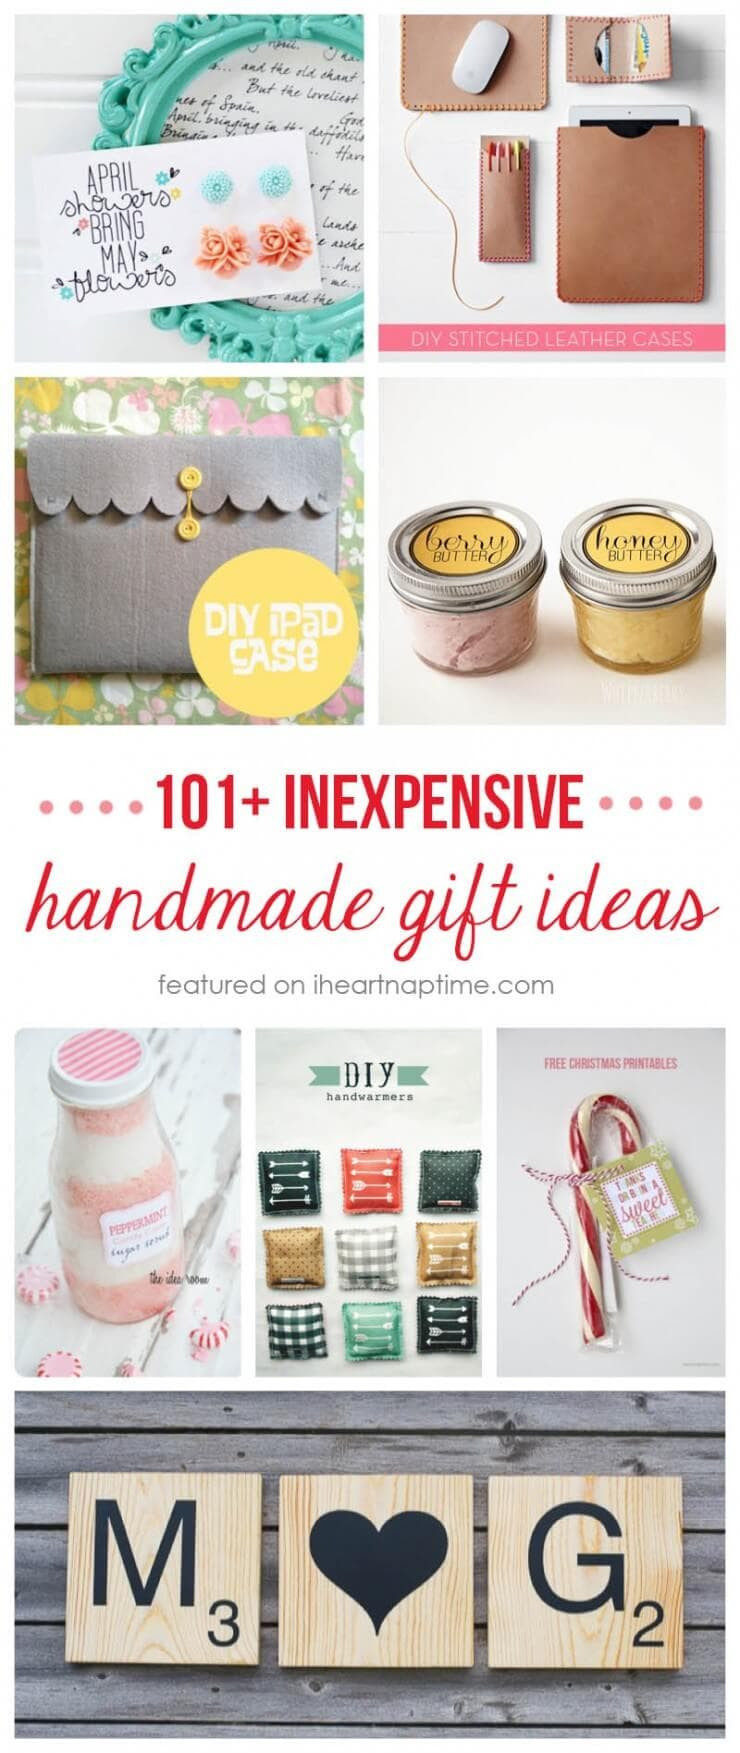 Christmas Gift Ideas To Make
 50 homemade t ideas to make for under $5 I Heart Nap Time